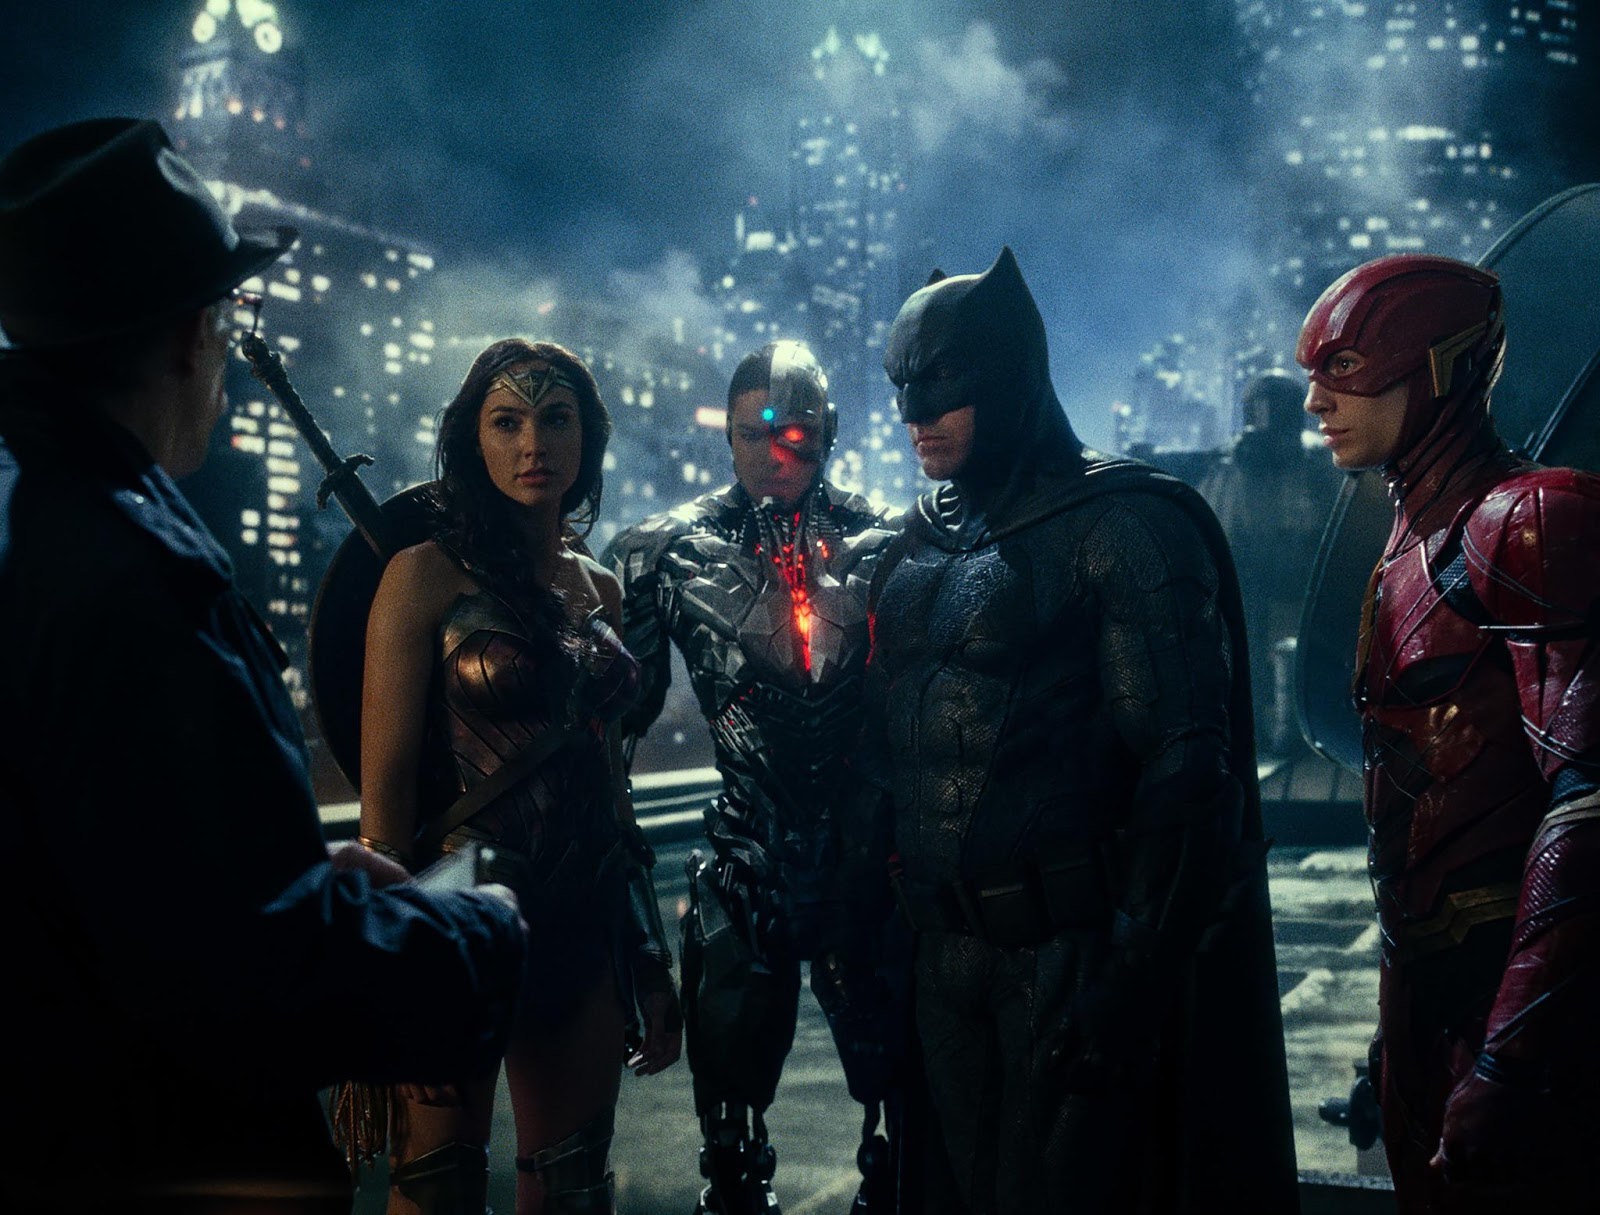 WATCH: Snyder Cut of JUSTICE LEAGUE Teaser Unveiled at DC FanDome